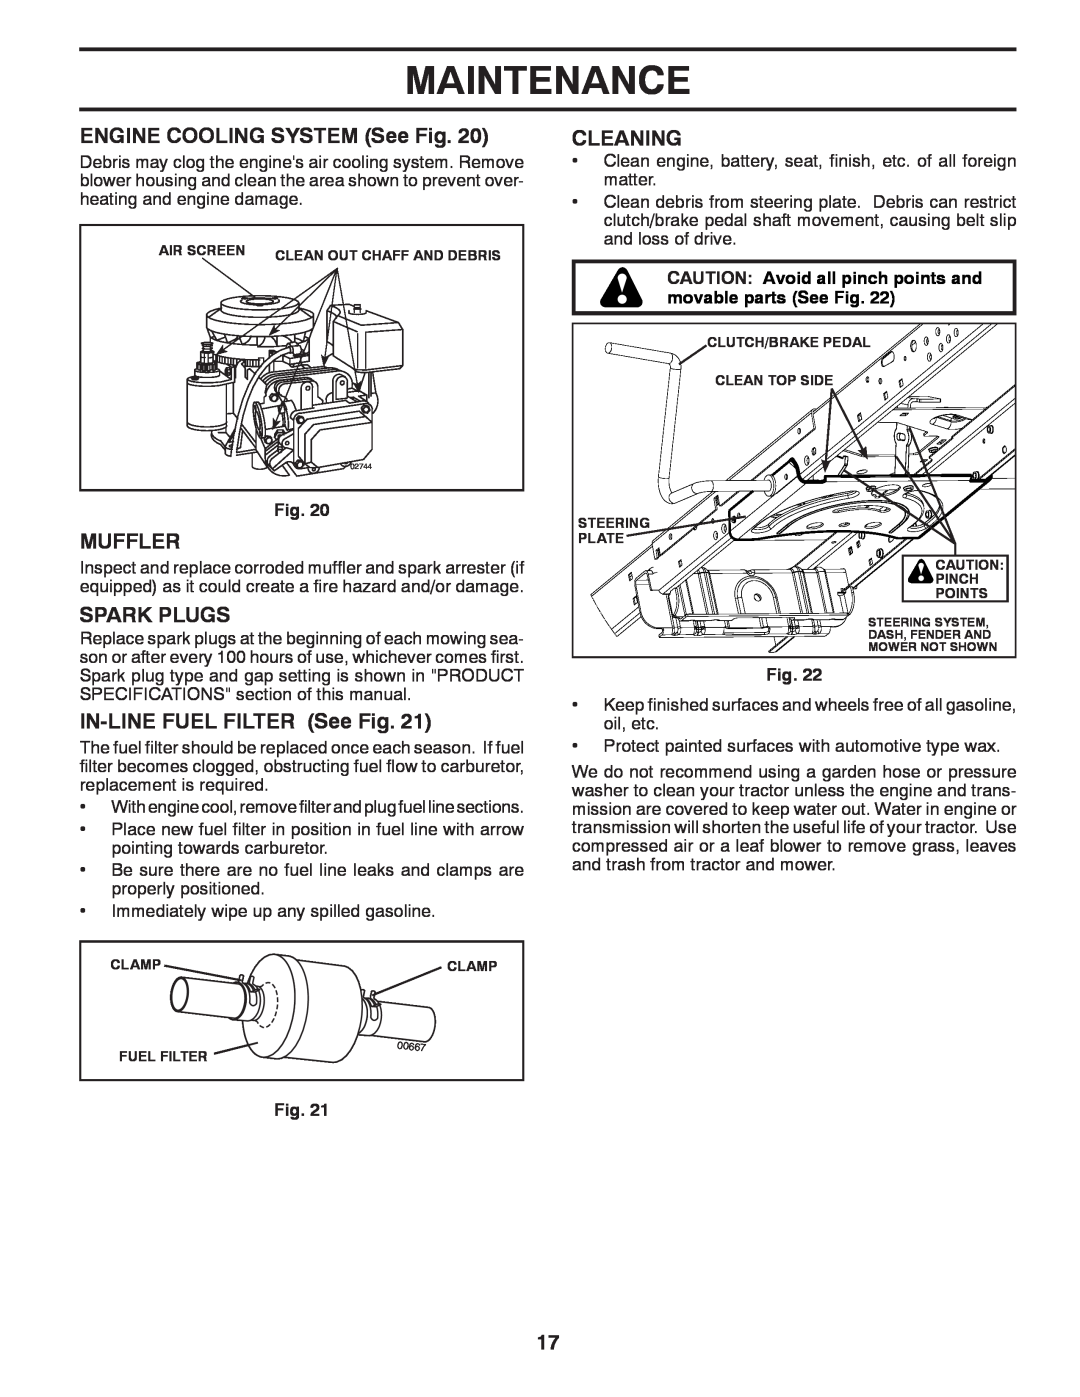 Poulan 34-80 manual Maintenance, ENGINE COOLING SYSTEM See Fig, Muffler, Spark Plugs, IN-LINE FUEL FILTER See Fig, Cleaning 